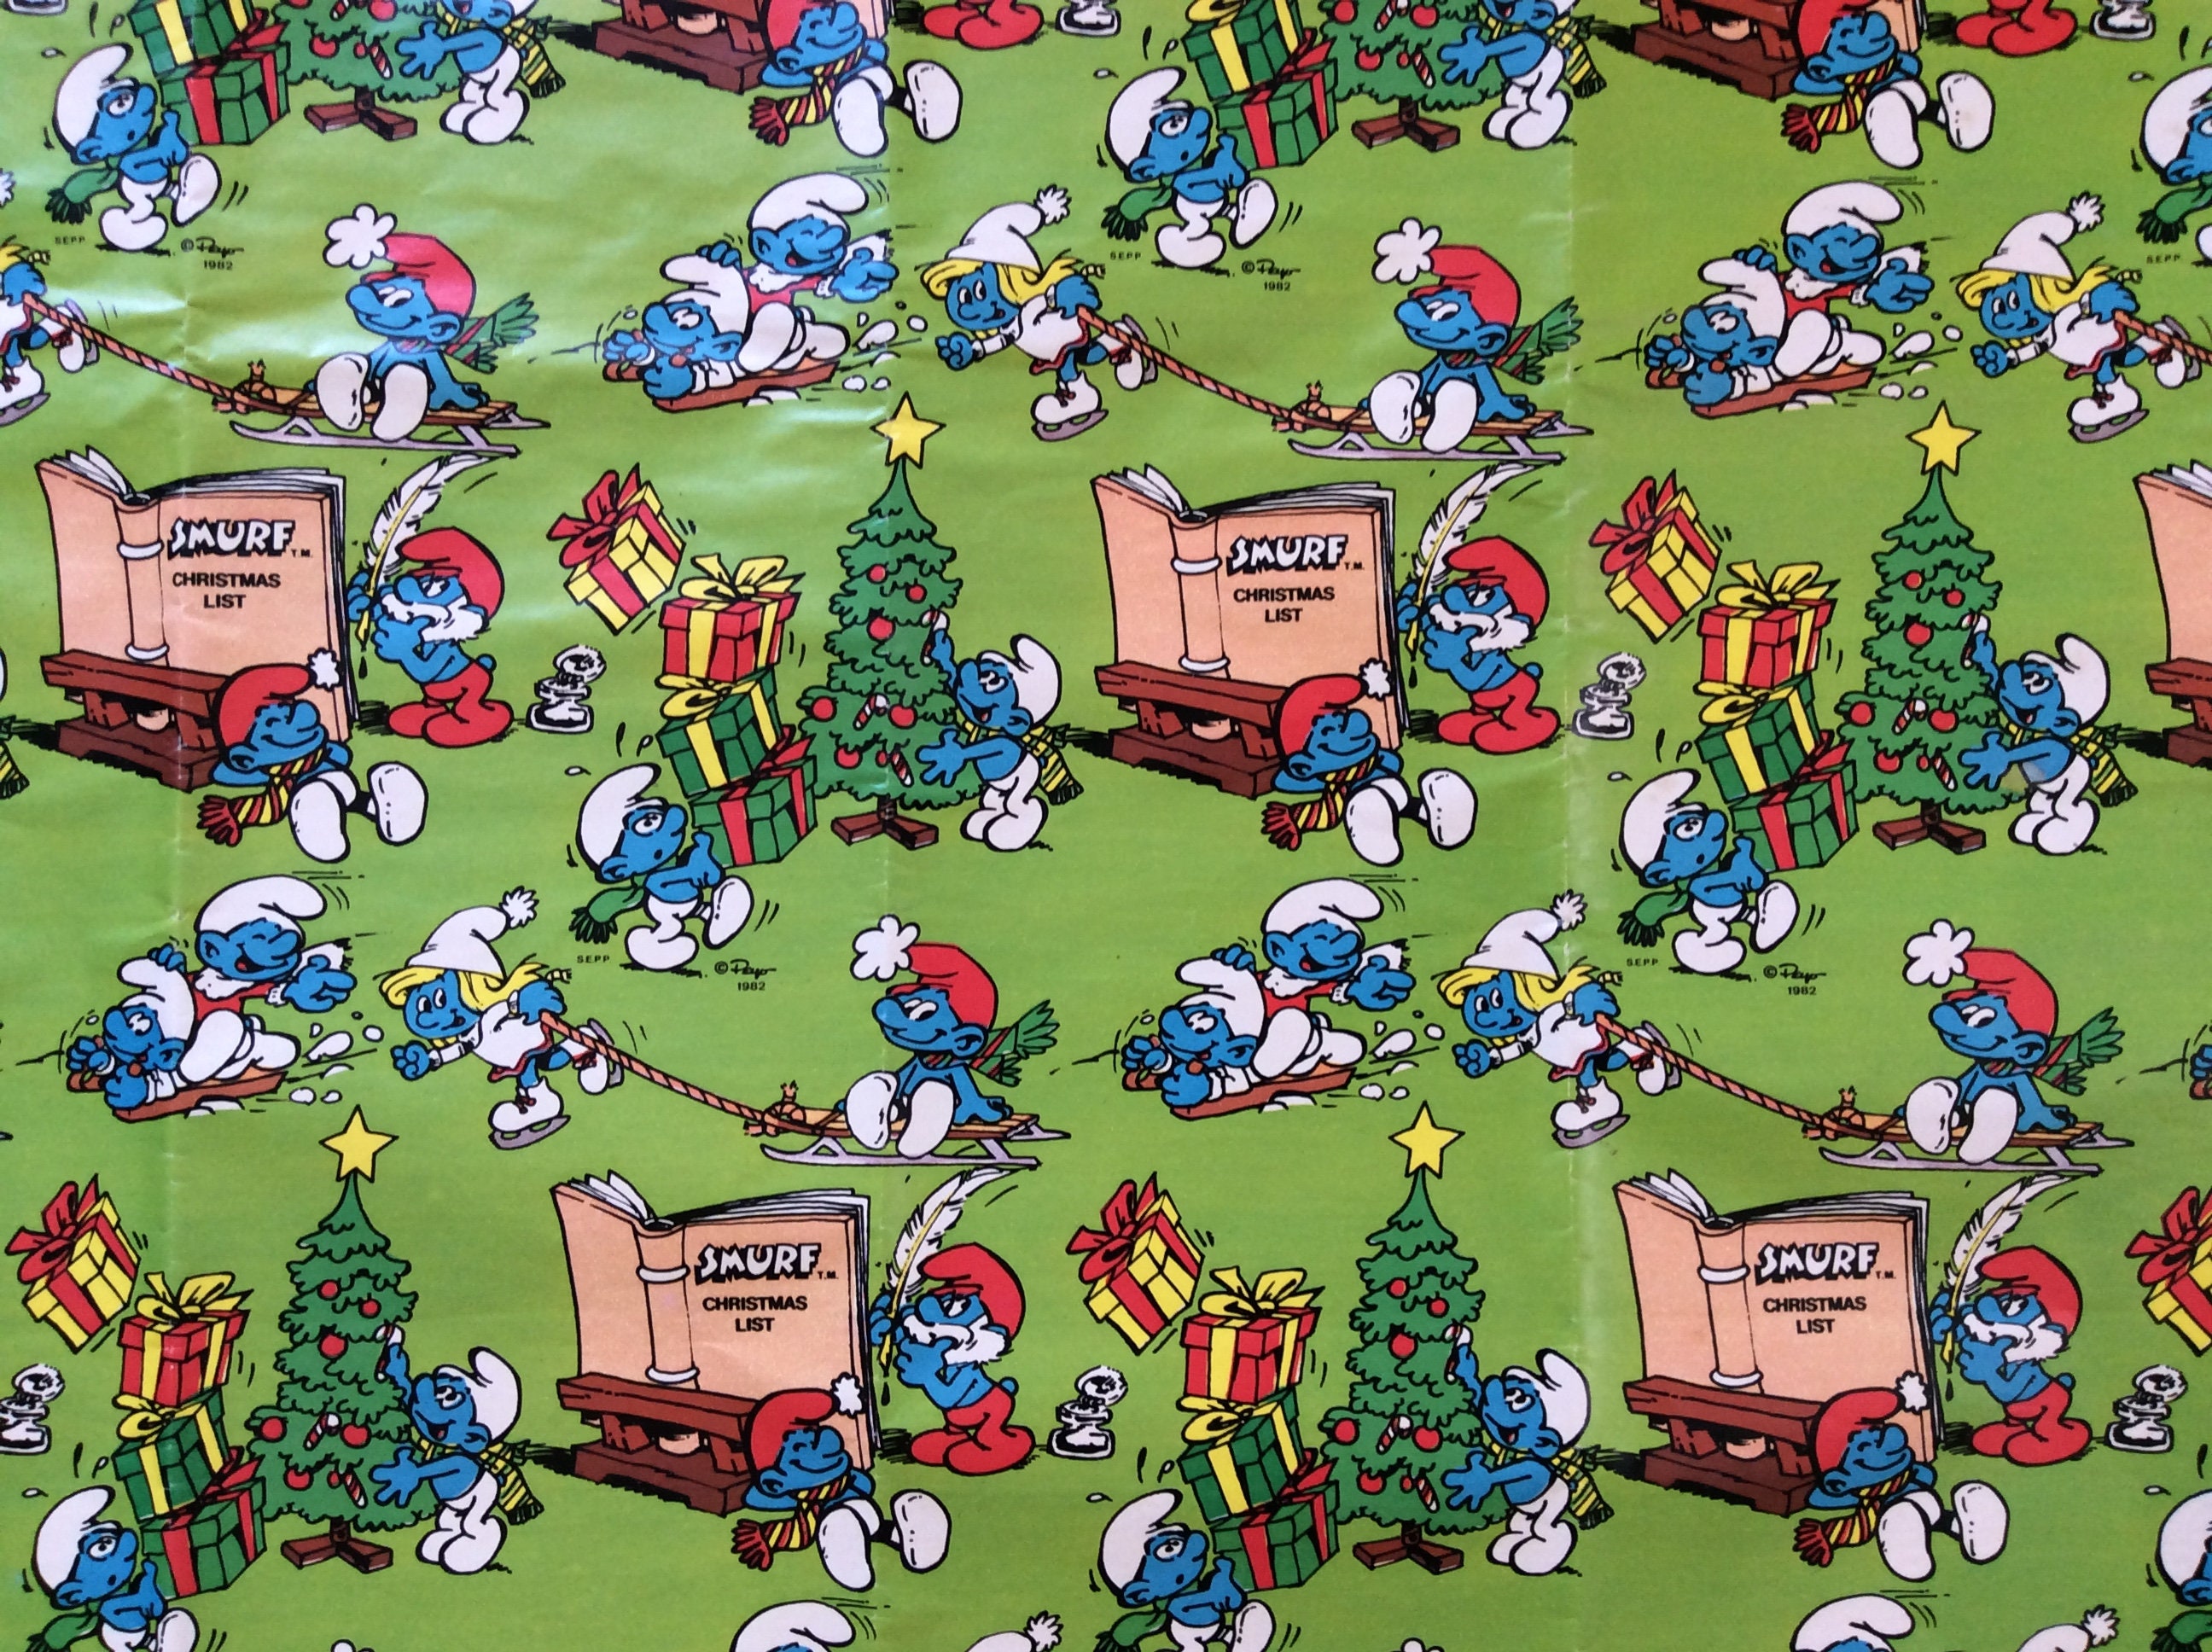 Vintage SMURF Christmas Wrapping Paper from 1982 Sheet | Etsy